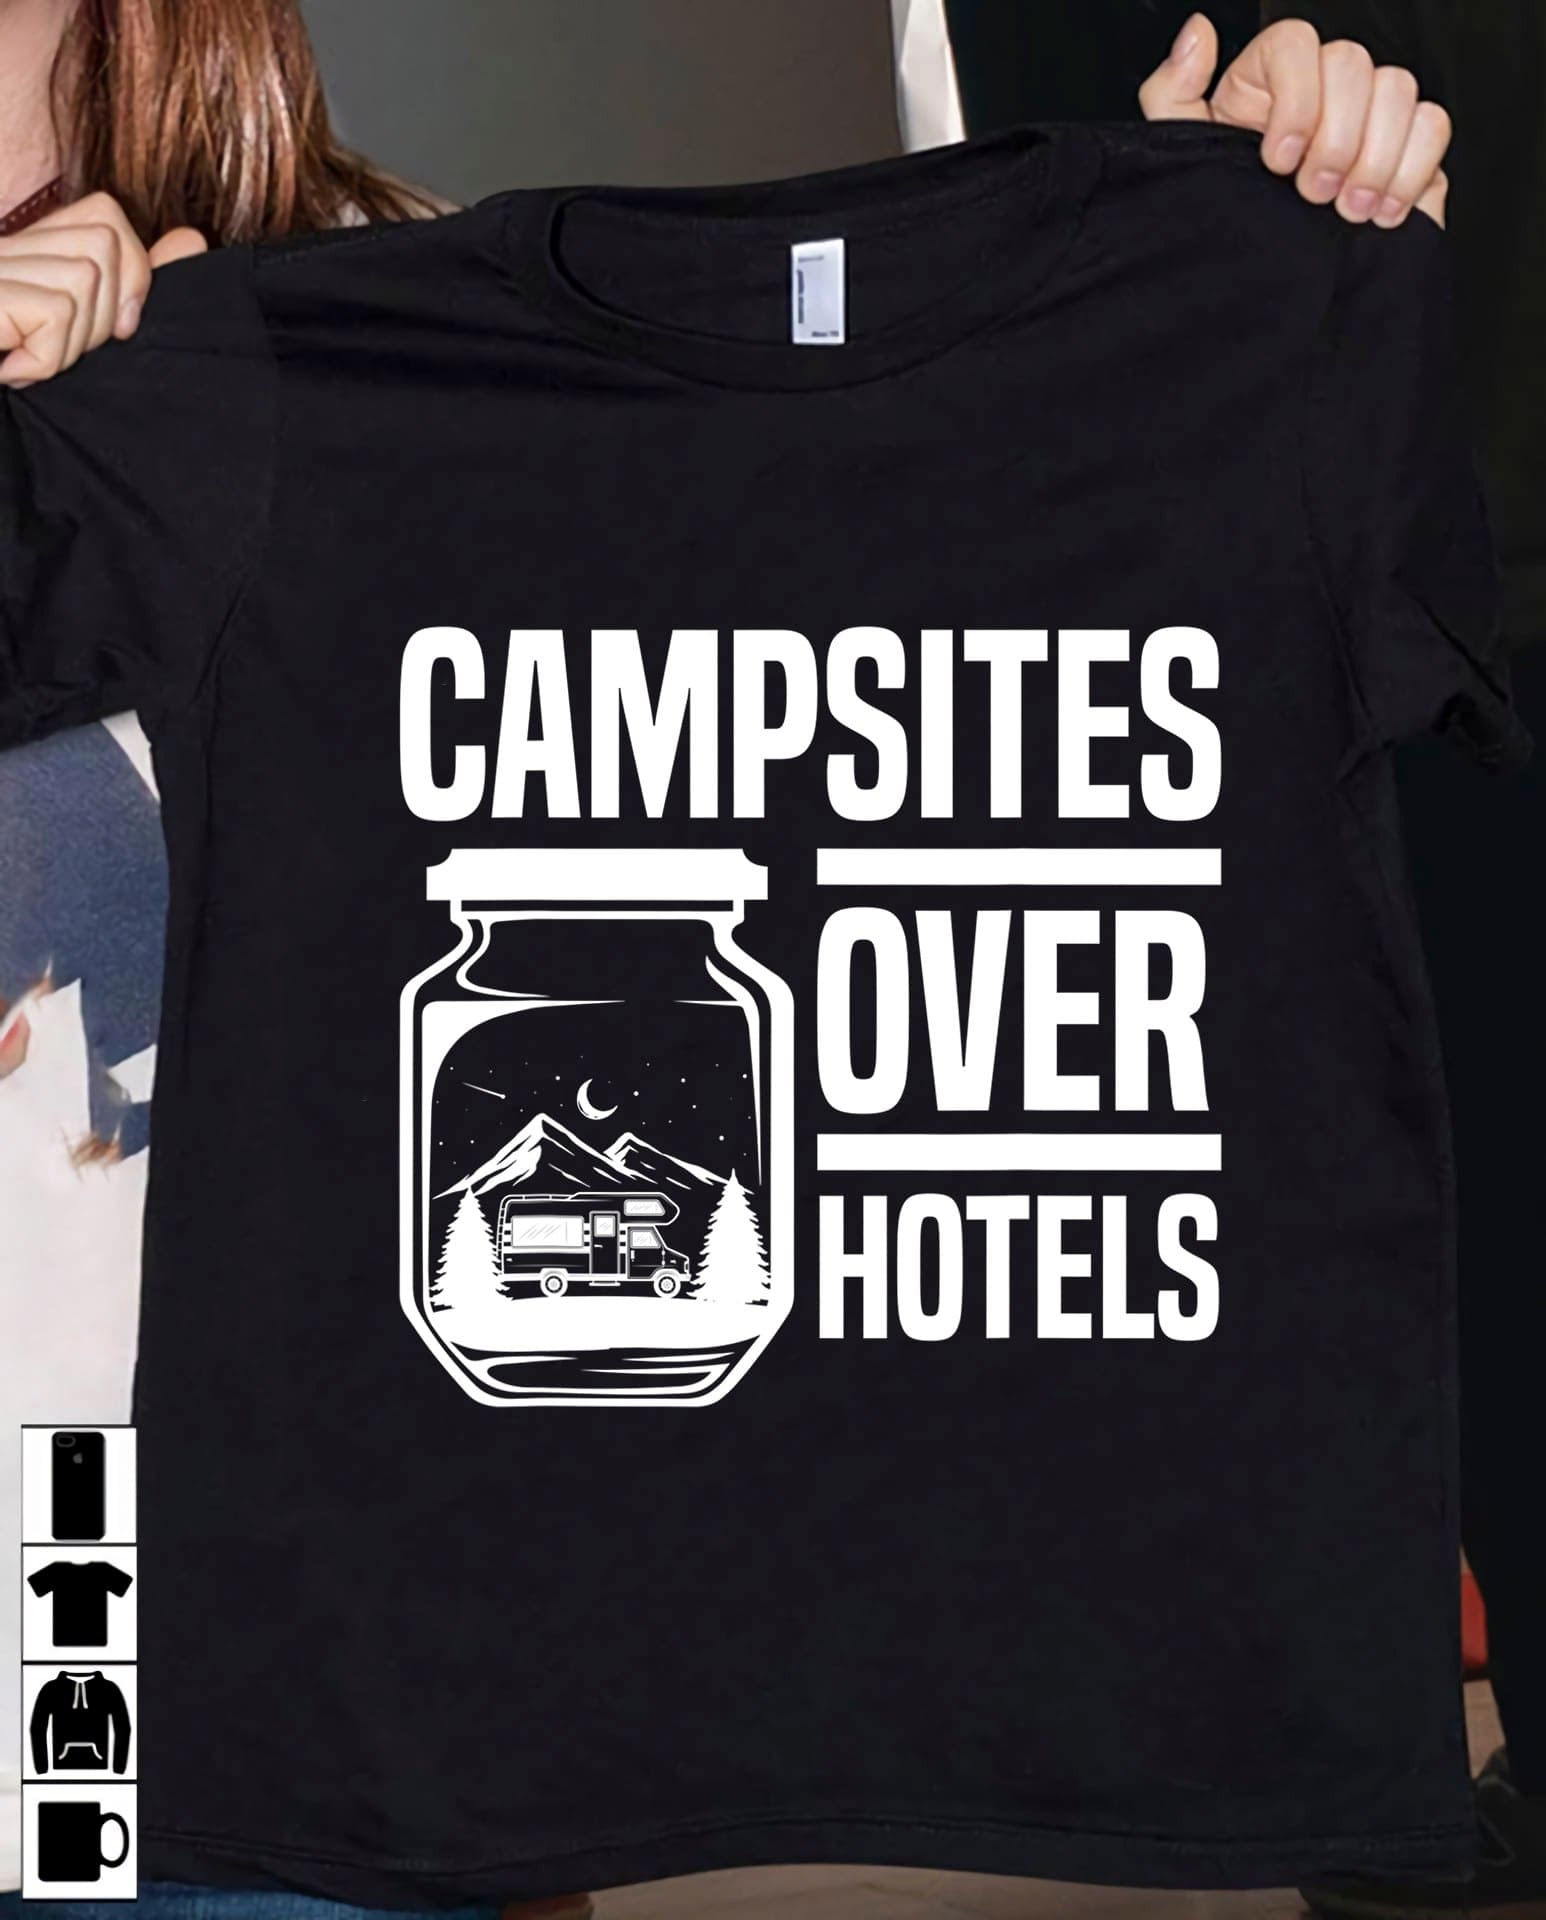 Campsites over hotel - Camping Car Gift For Camper